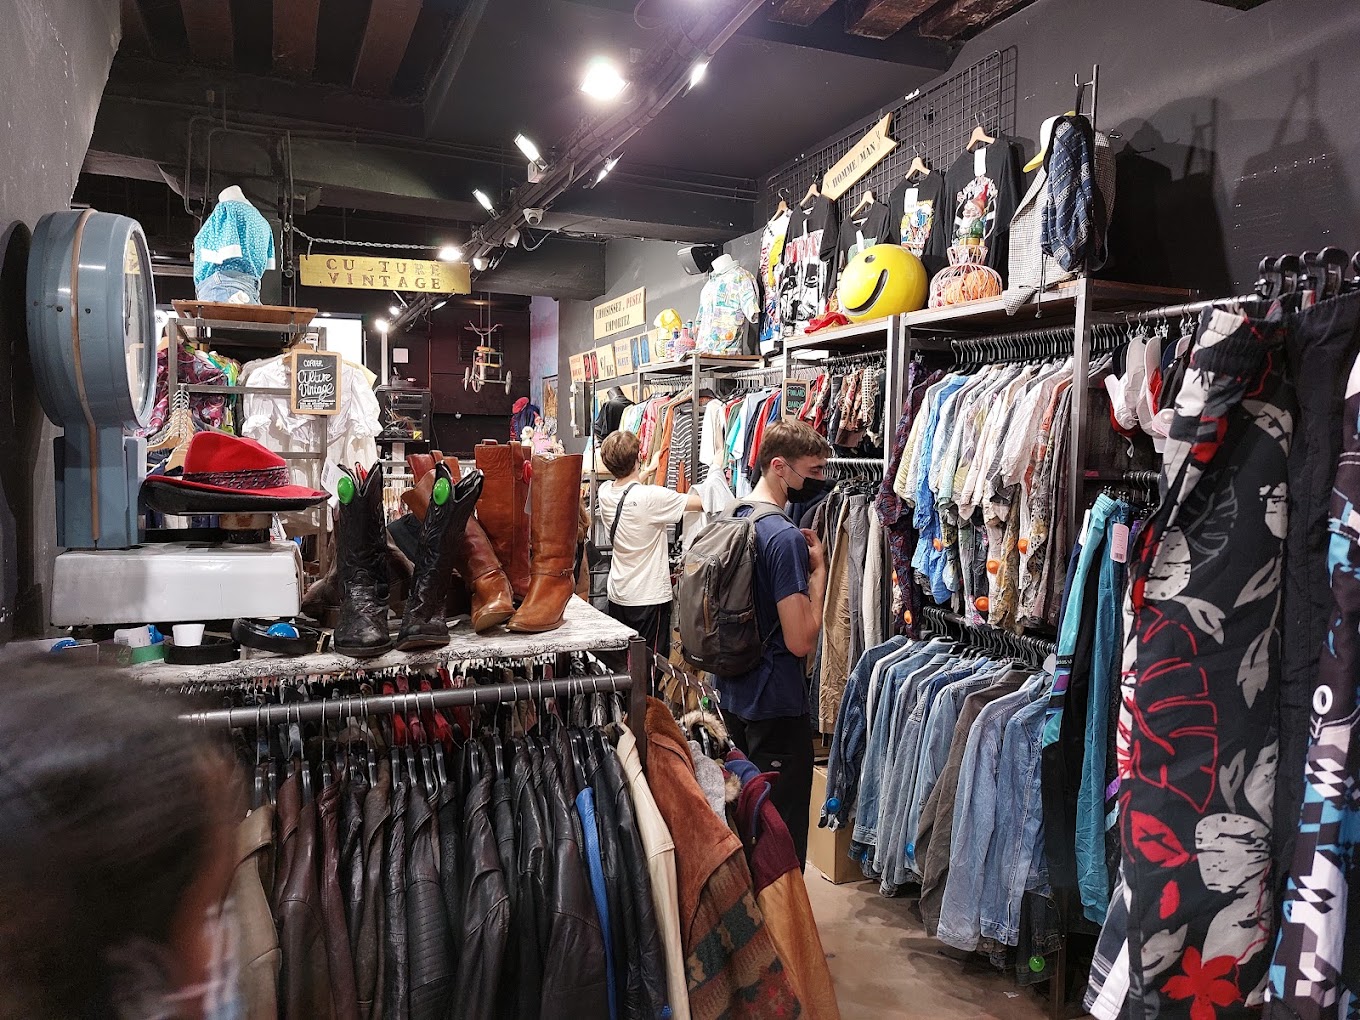 Interior of the Kilo Shop, a popular vintage store in Le Marais, Paris. The scene shows diverse shoppers browsing through an eclectic mix of items, including racks of colorful vintage clothing and shelves filled with boots and accessories, creating a vibrant and bustling shopping atmosphere.